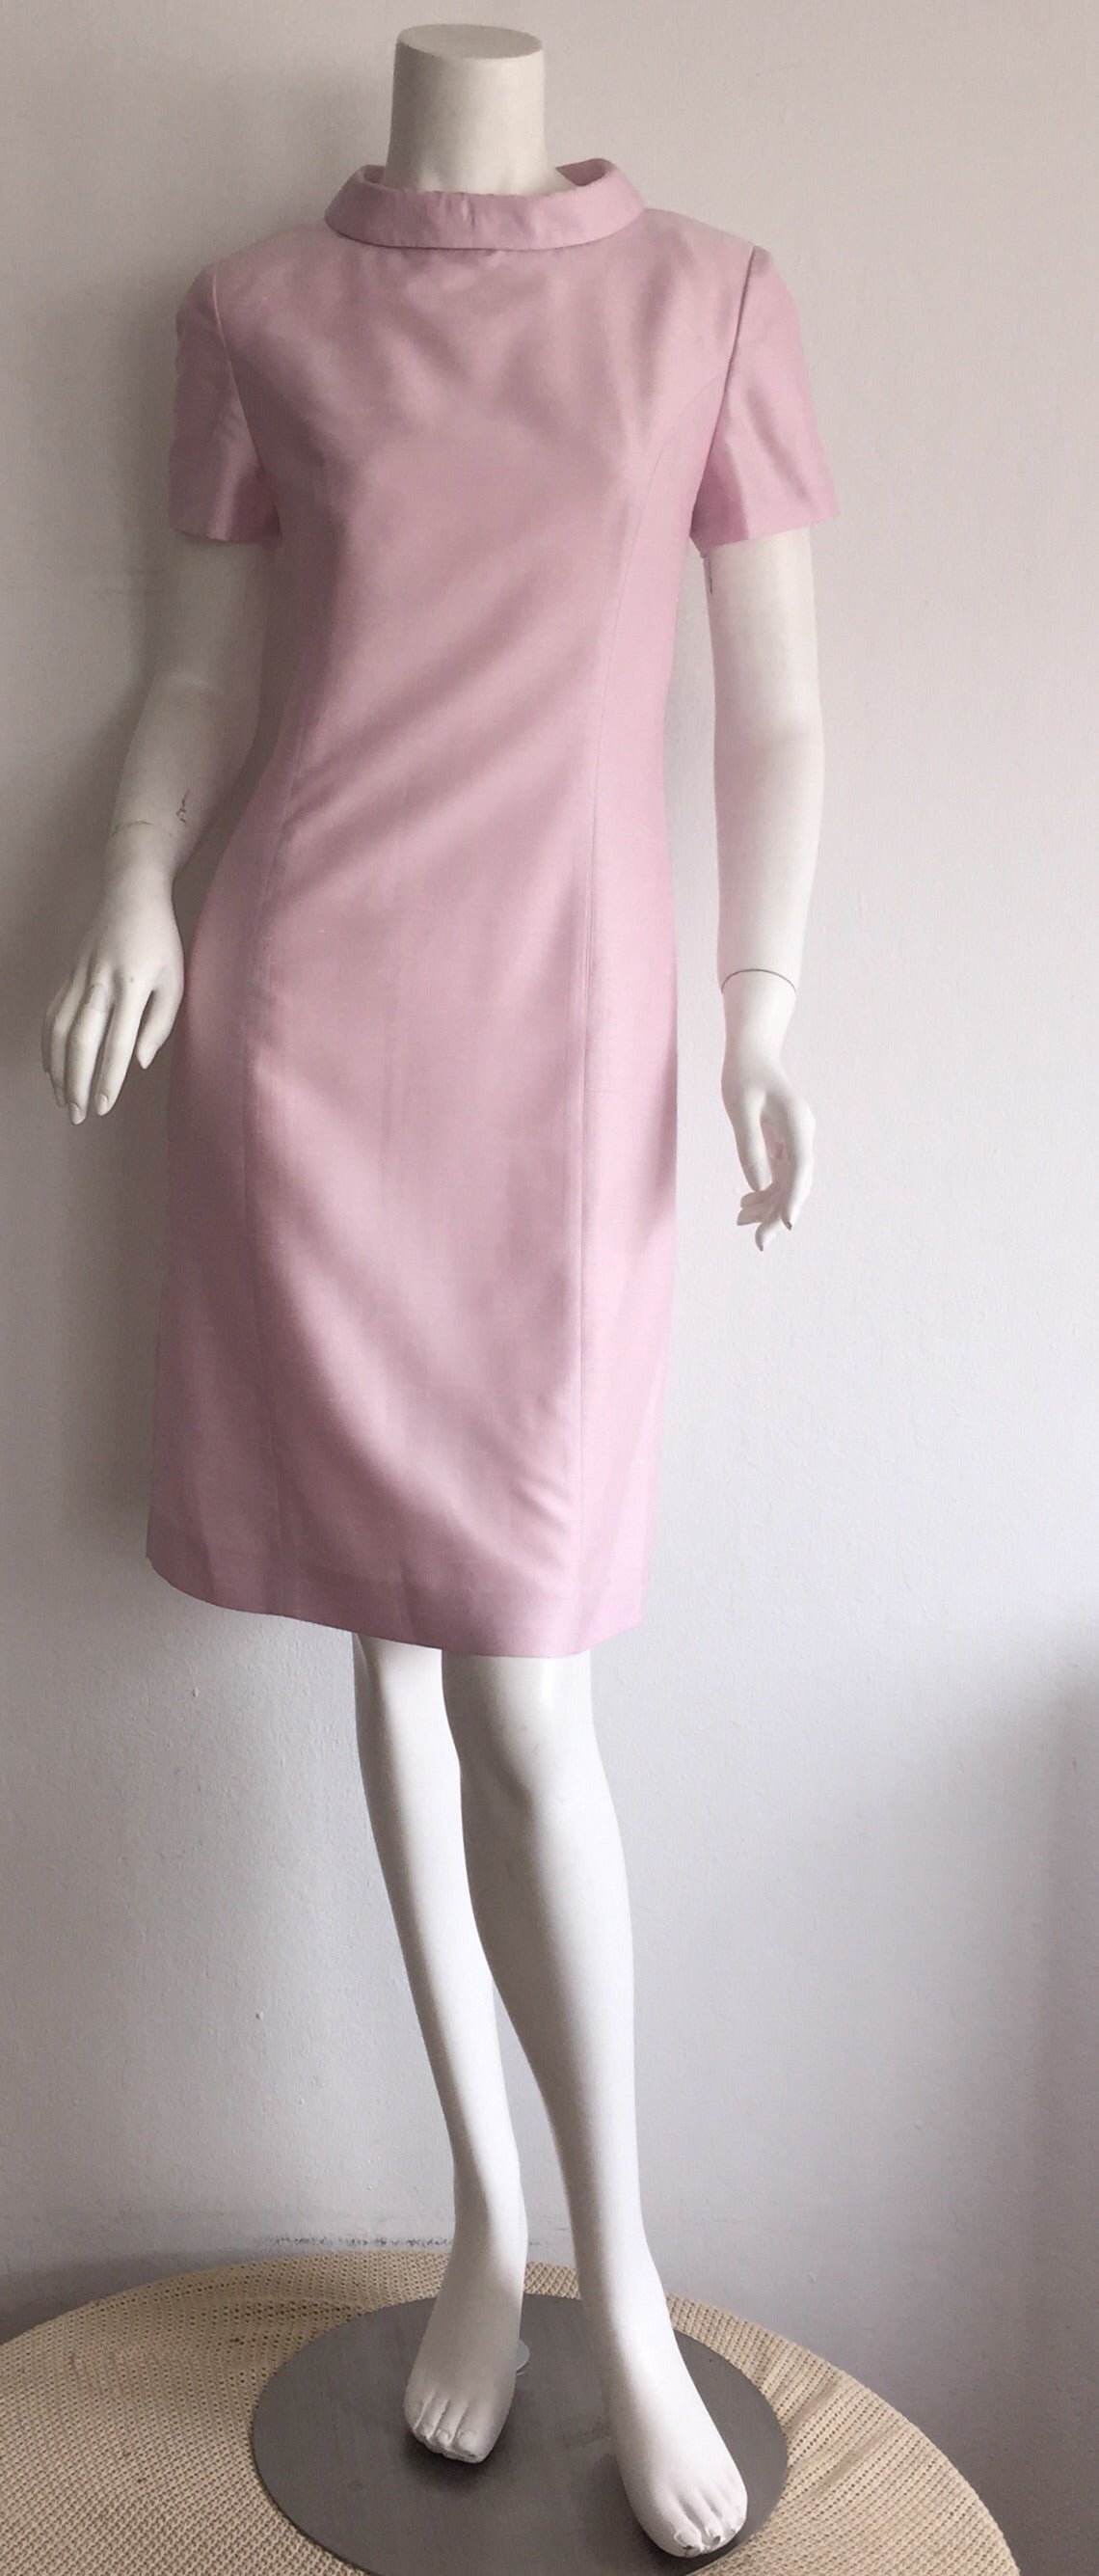 Beautiful vintage Courreges light pink silk dress! Jackie-O style, with the perfect shift shape! Easily goes from day to night with sandals, flats, or heels. Also, looks great belted. Fully lined. In great condition. Approximately Size